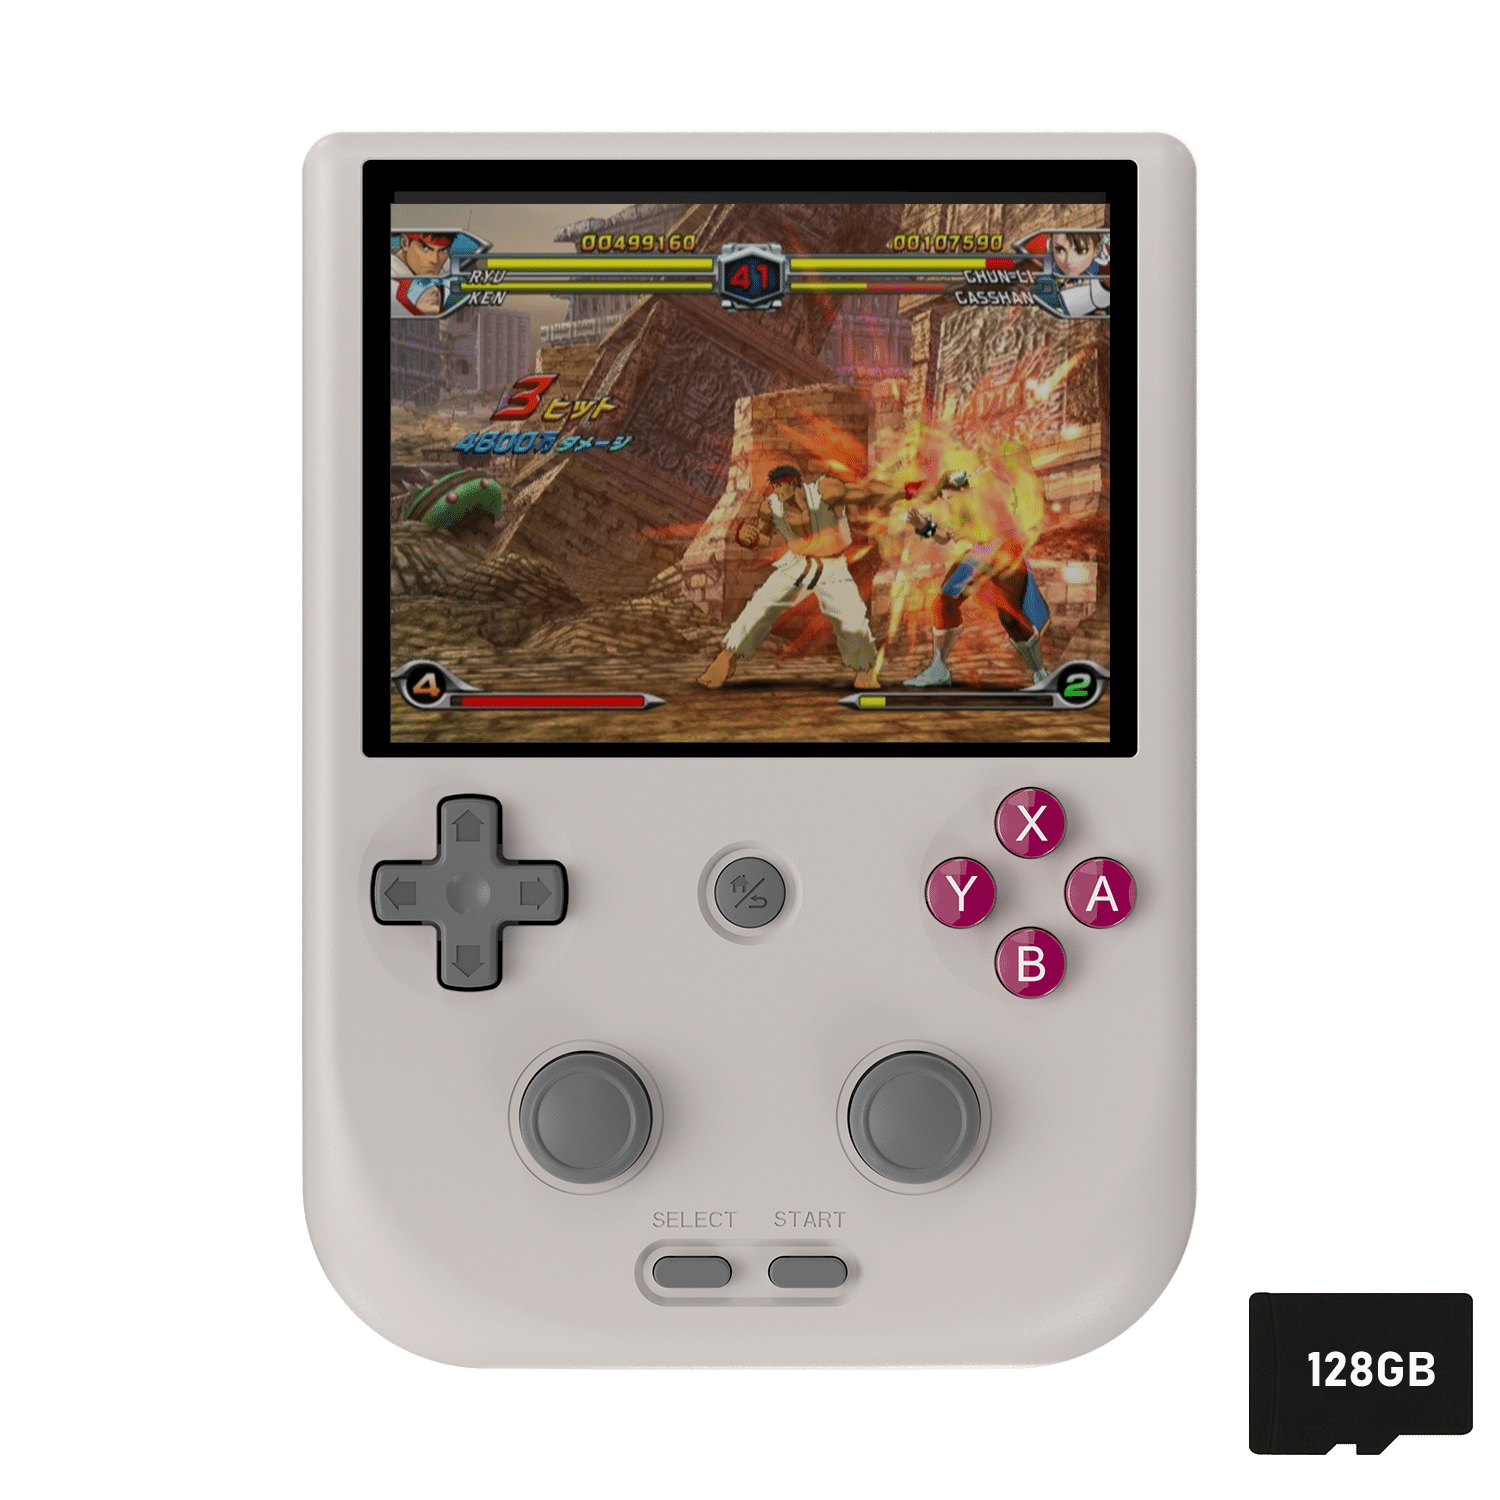 Anbernic announces launch date for the RG405V retro handheld